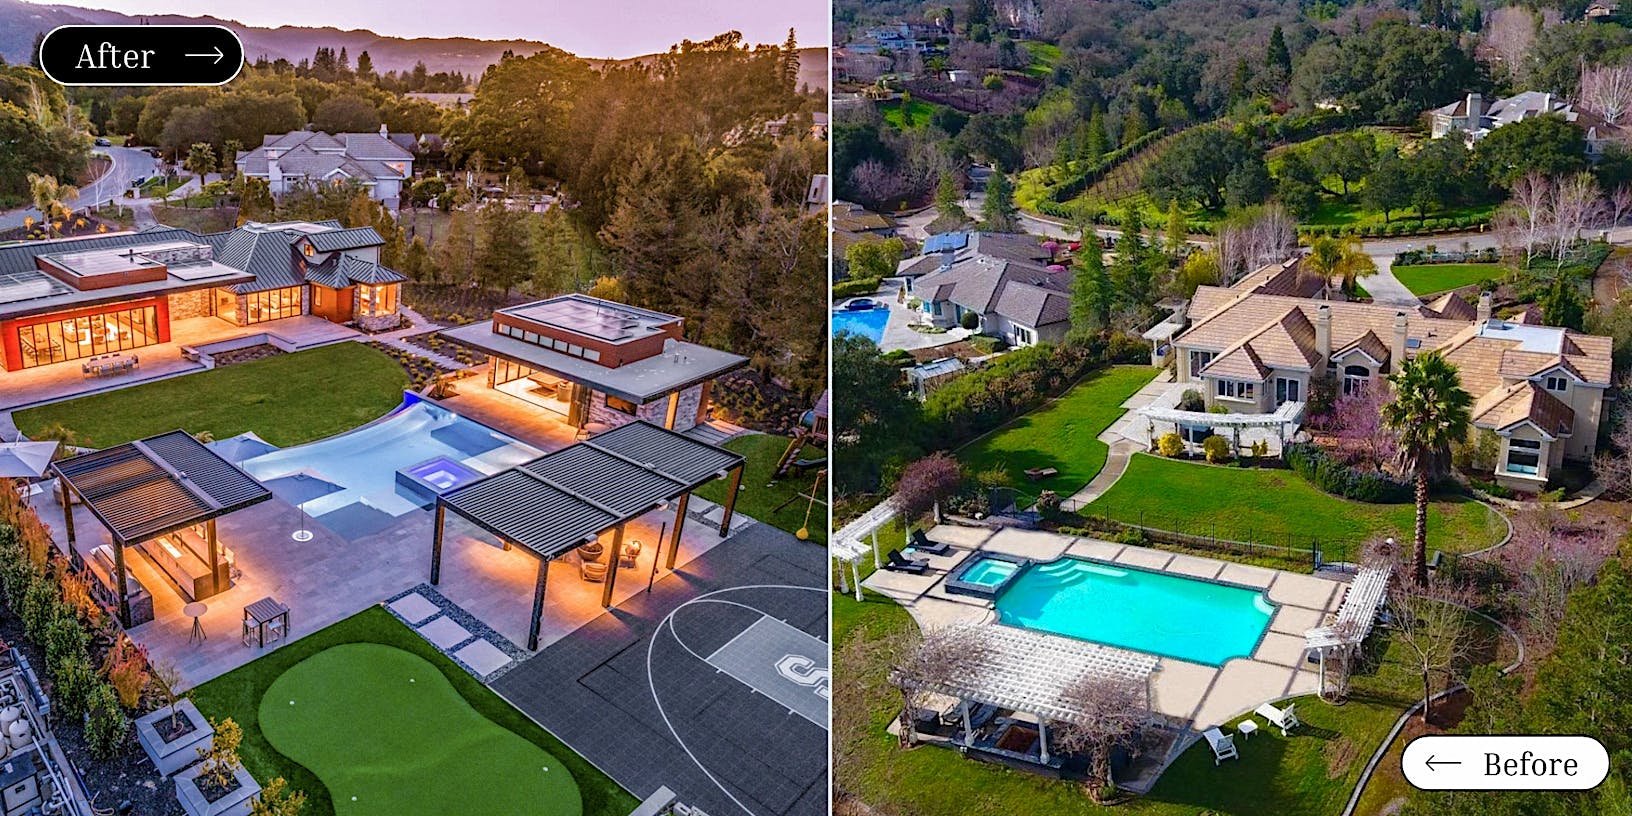 An aerial view of a home with bifold glass doors, a pool, and a golf course